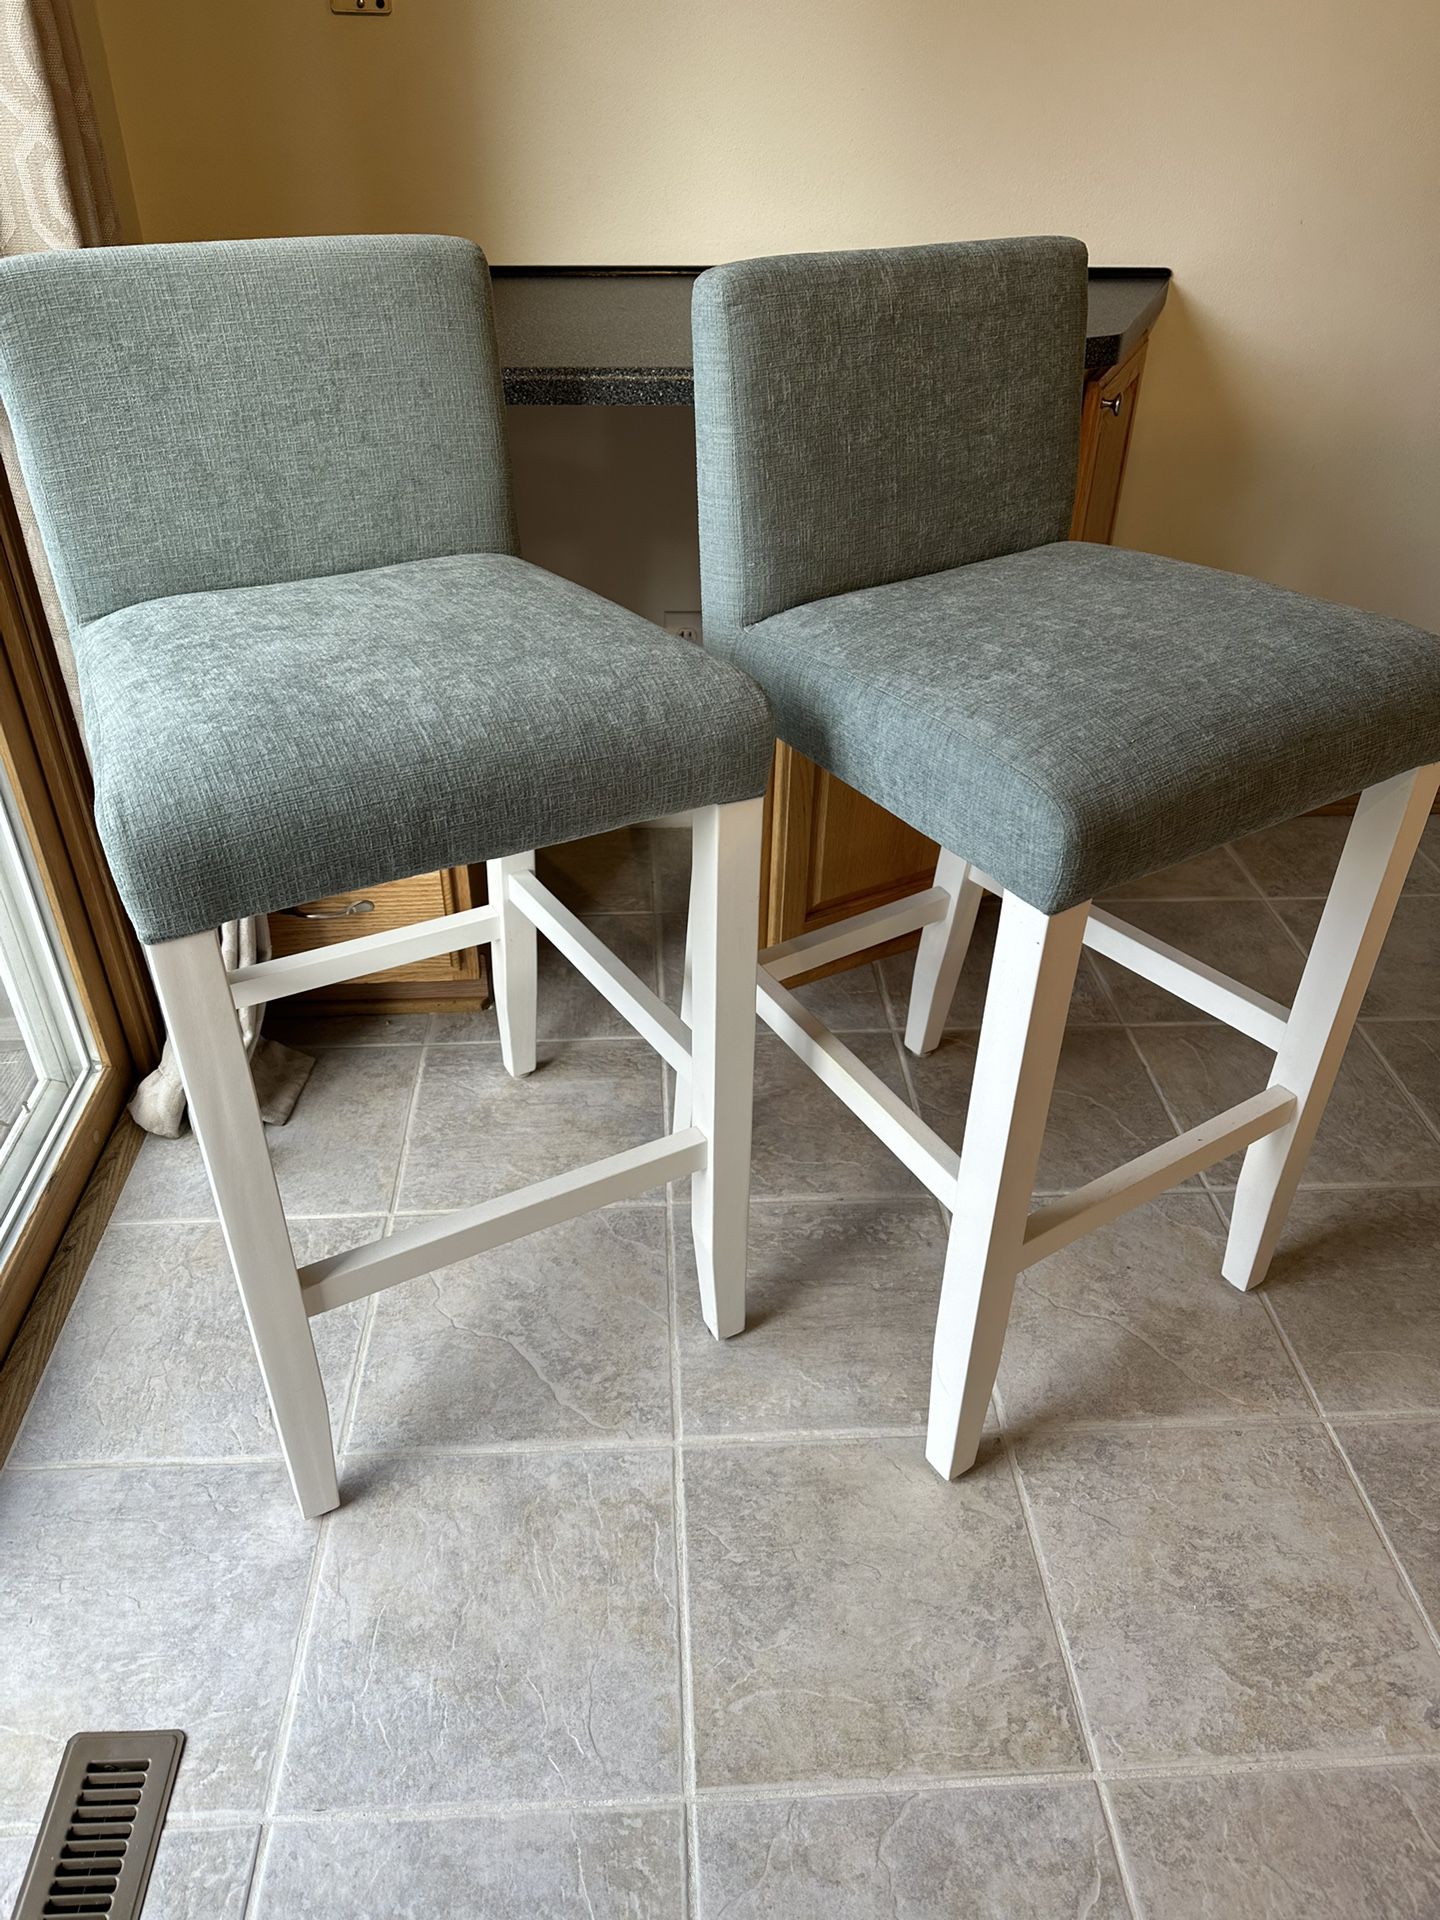 Pair of Two Pier 1 Imports, 30” Bar Height Stools,  Upholstered Seats And Low Backs, Like New!